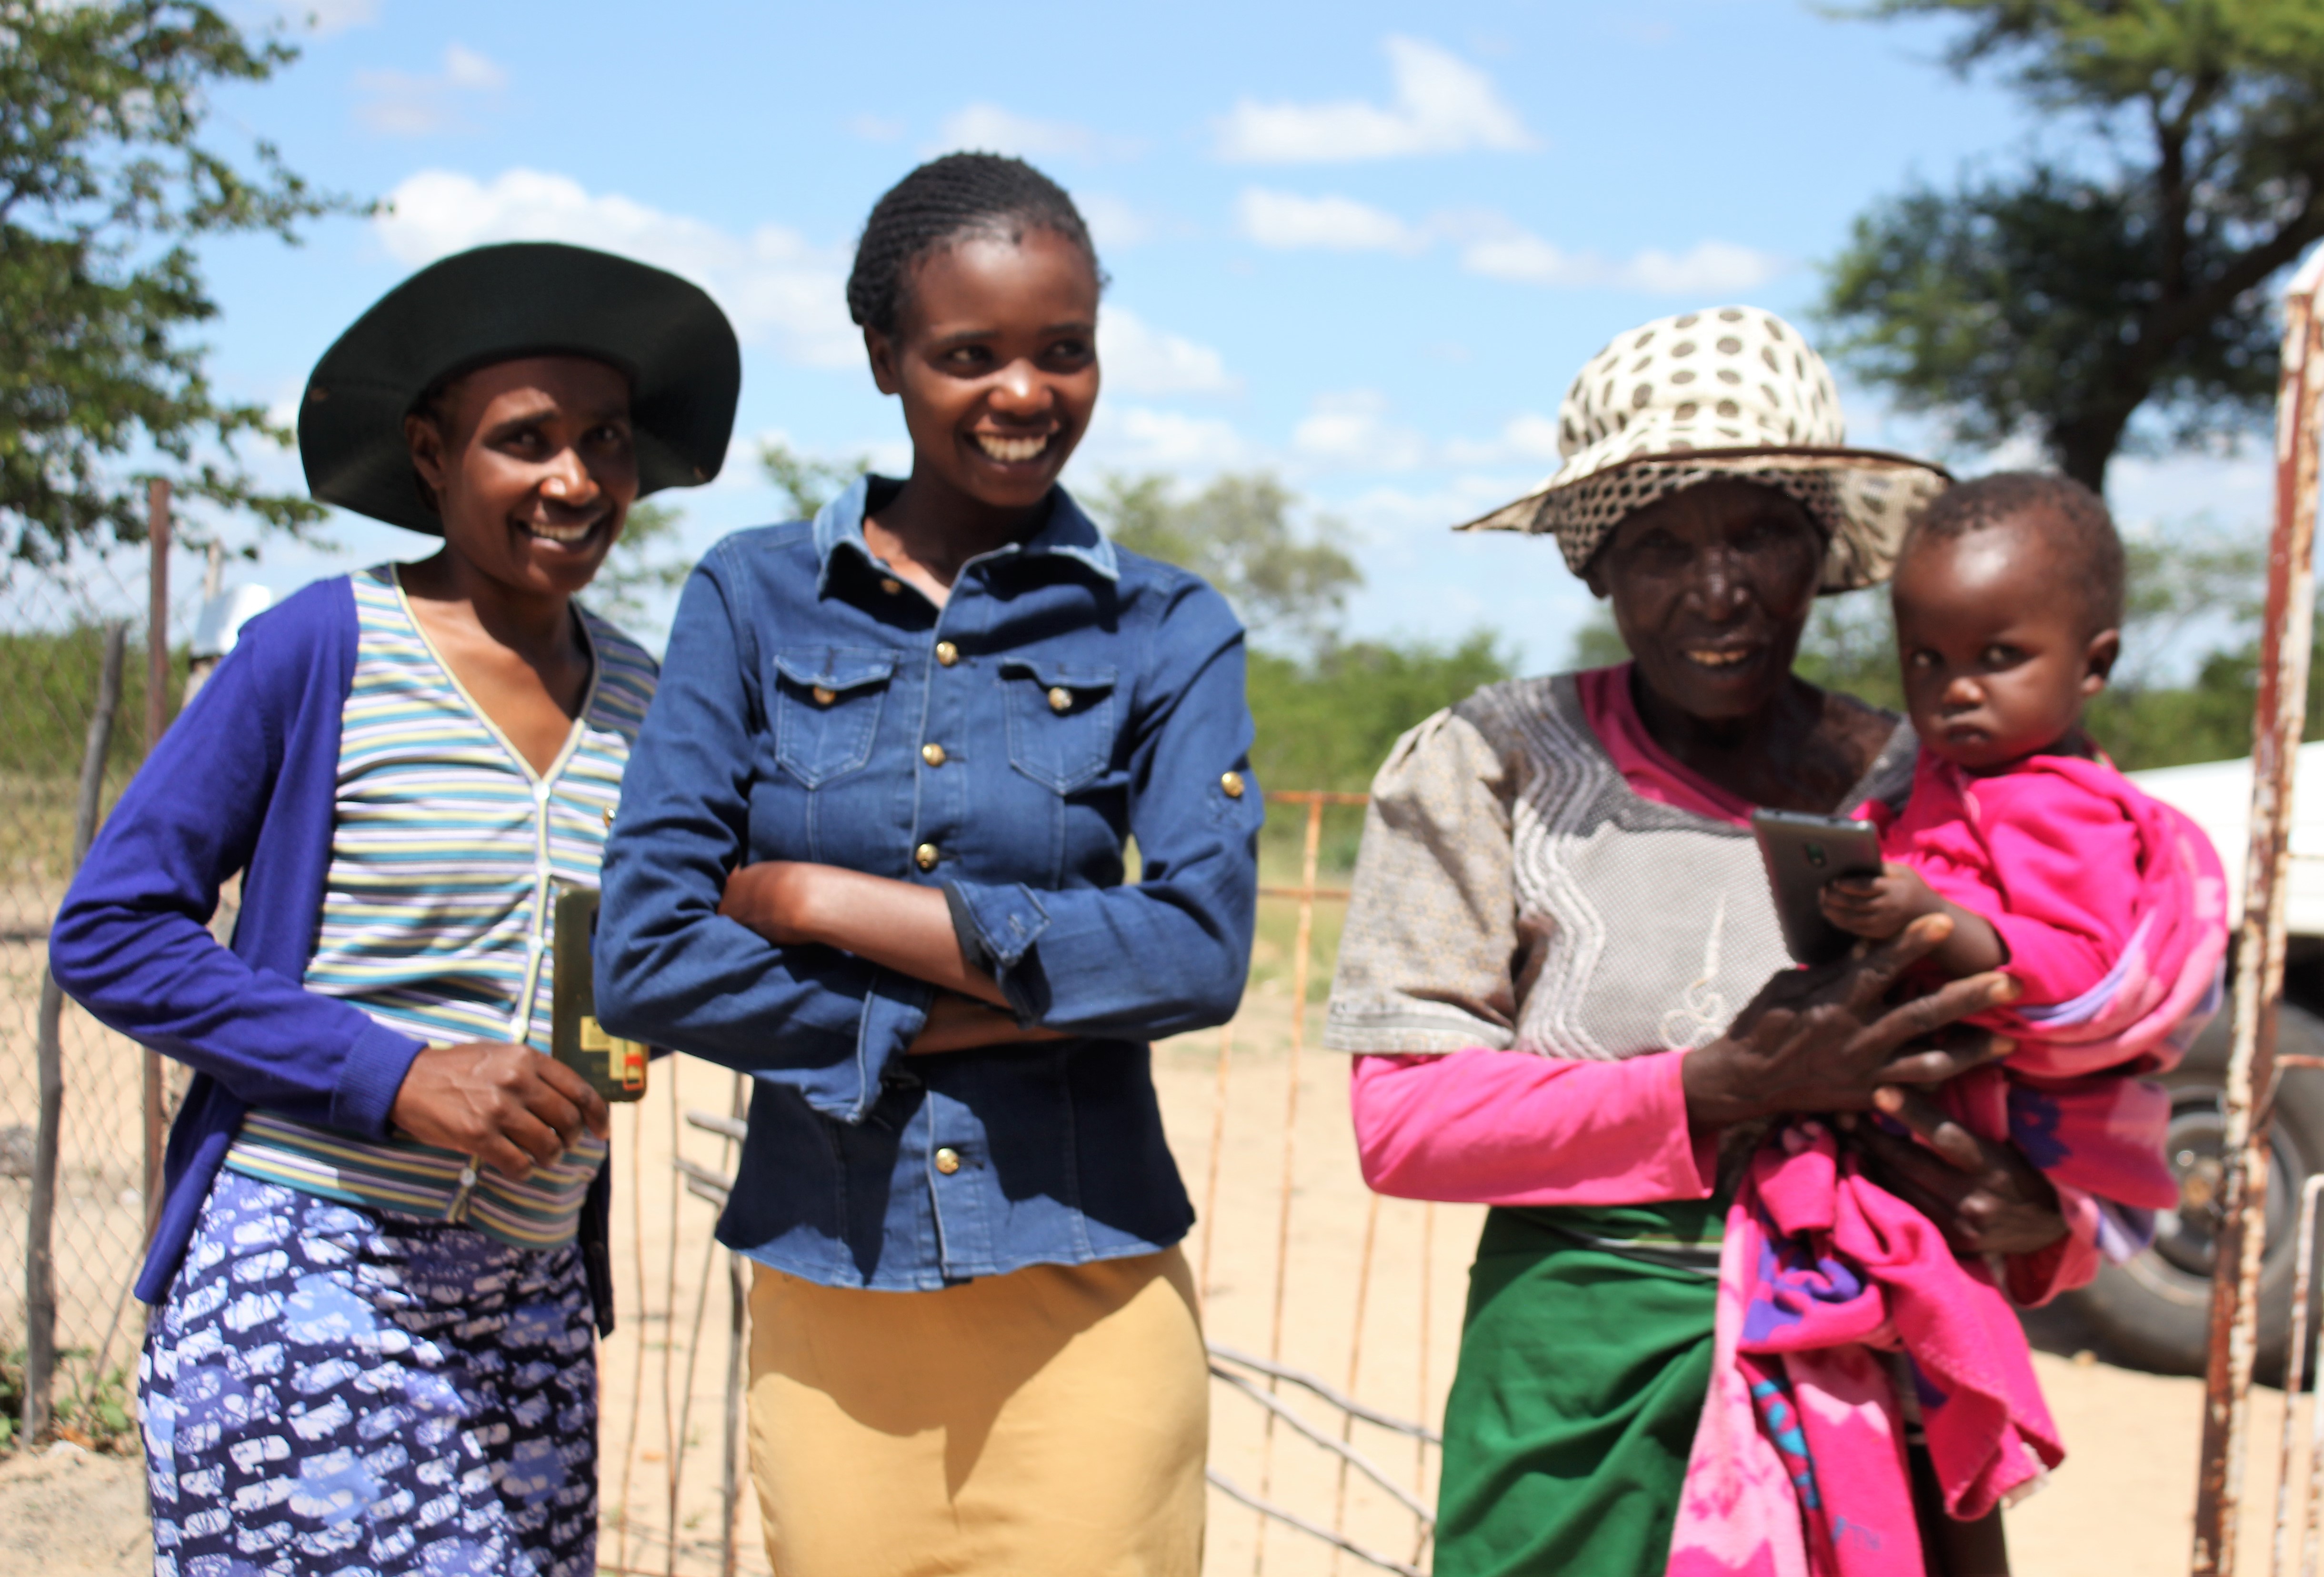 Four generations of women from one family pose together in Zimbabwe